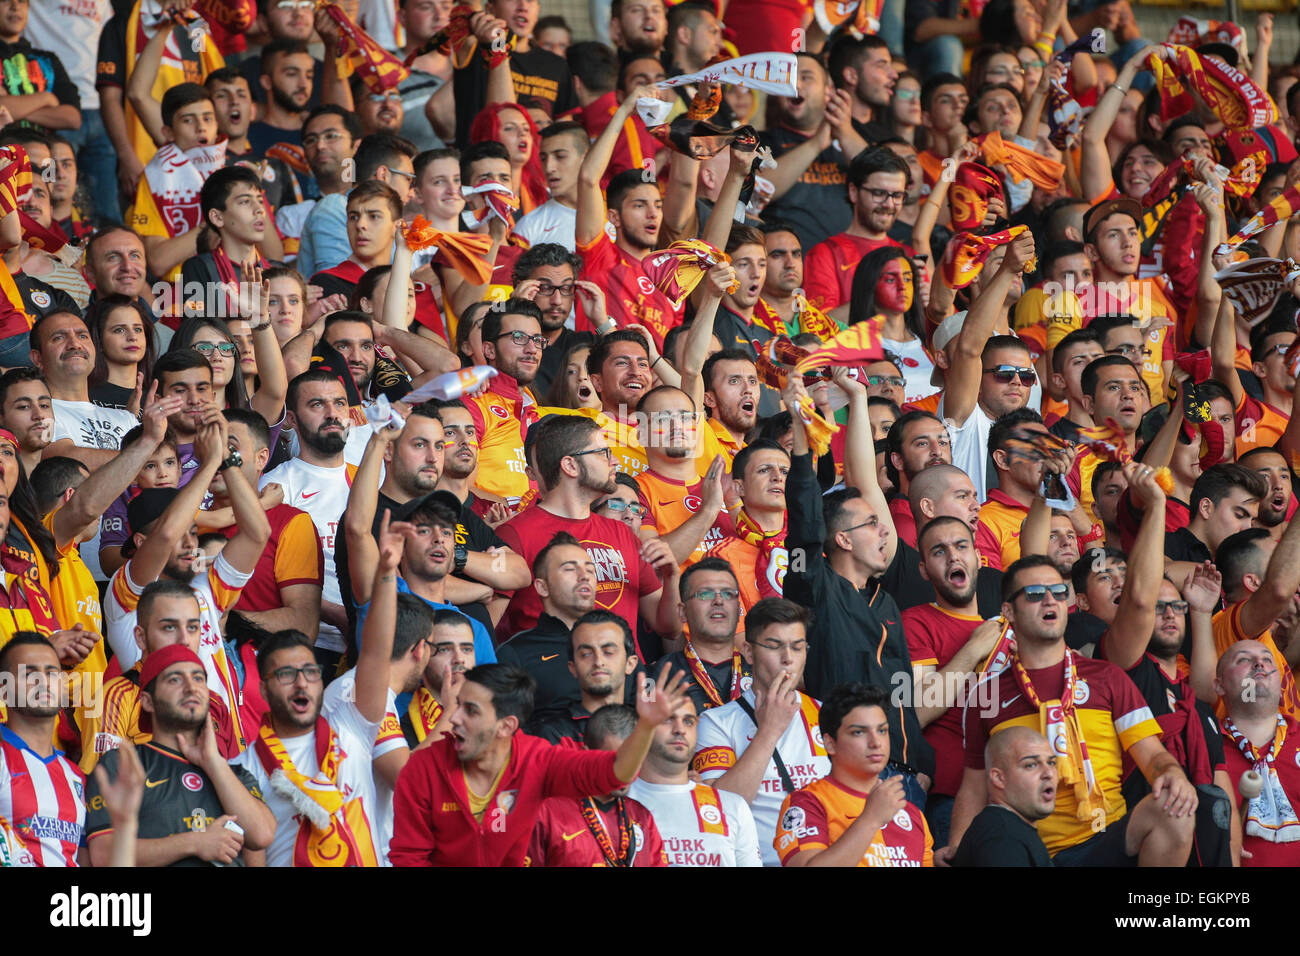 VIENNA, AUSTRIA - JULY 27, 2014: Fans of Galatasaray Istanbul cheer on their team during a friendly game against SK Rapid Vienna Stock Photo